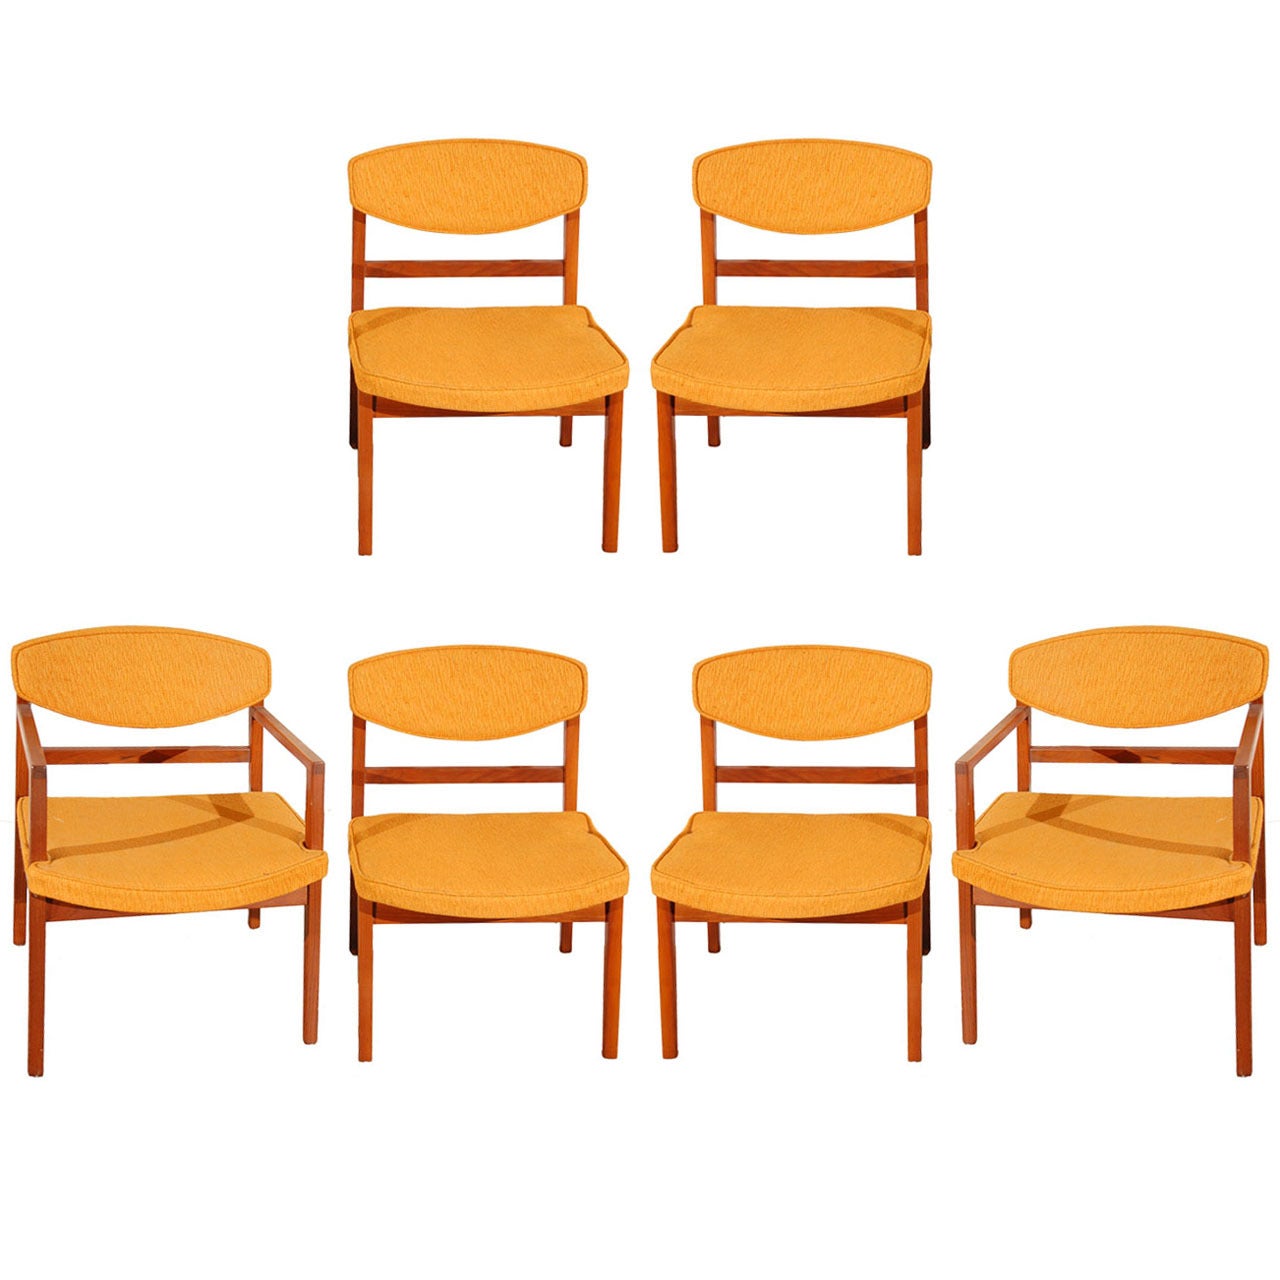 6 George Nelson chairs for Herman Miller